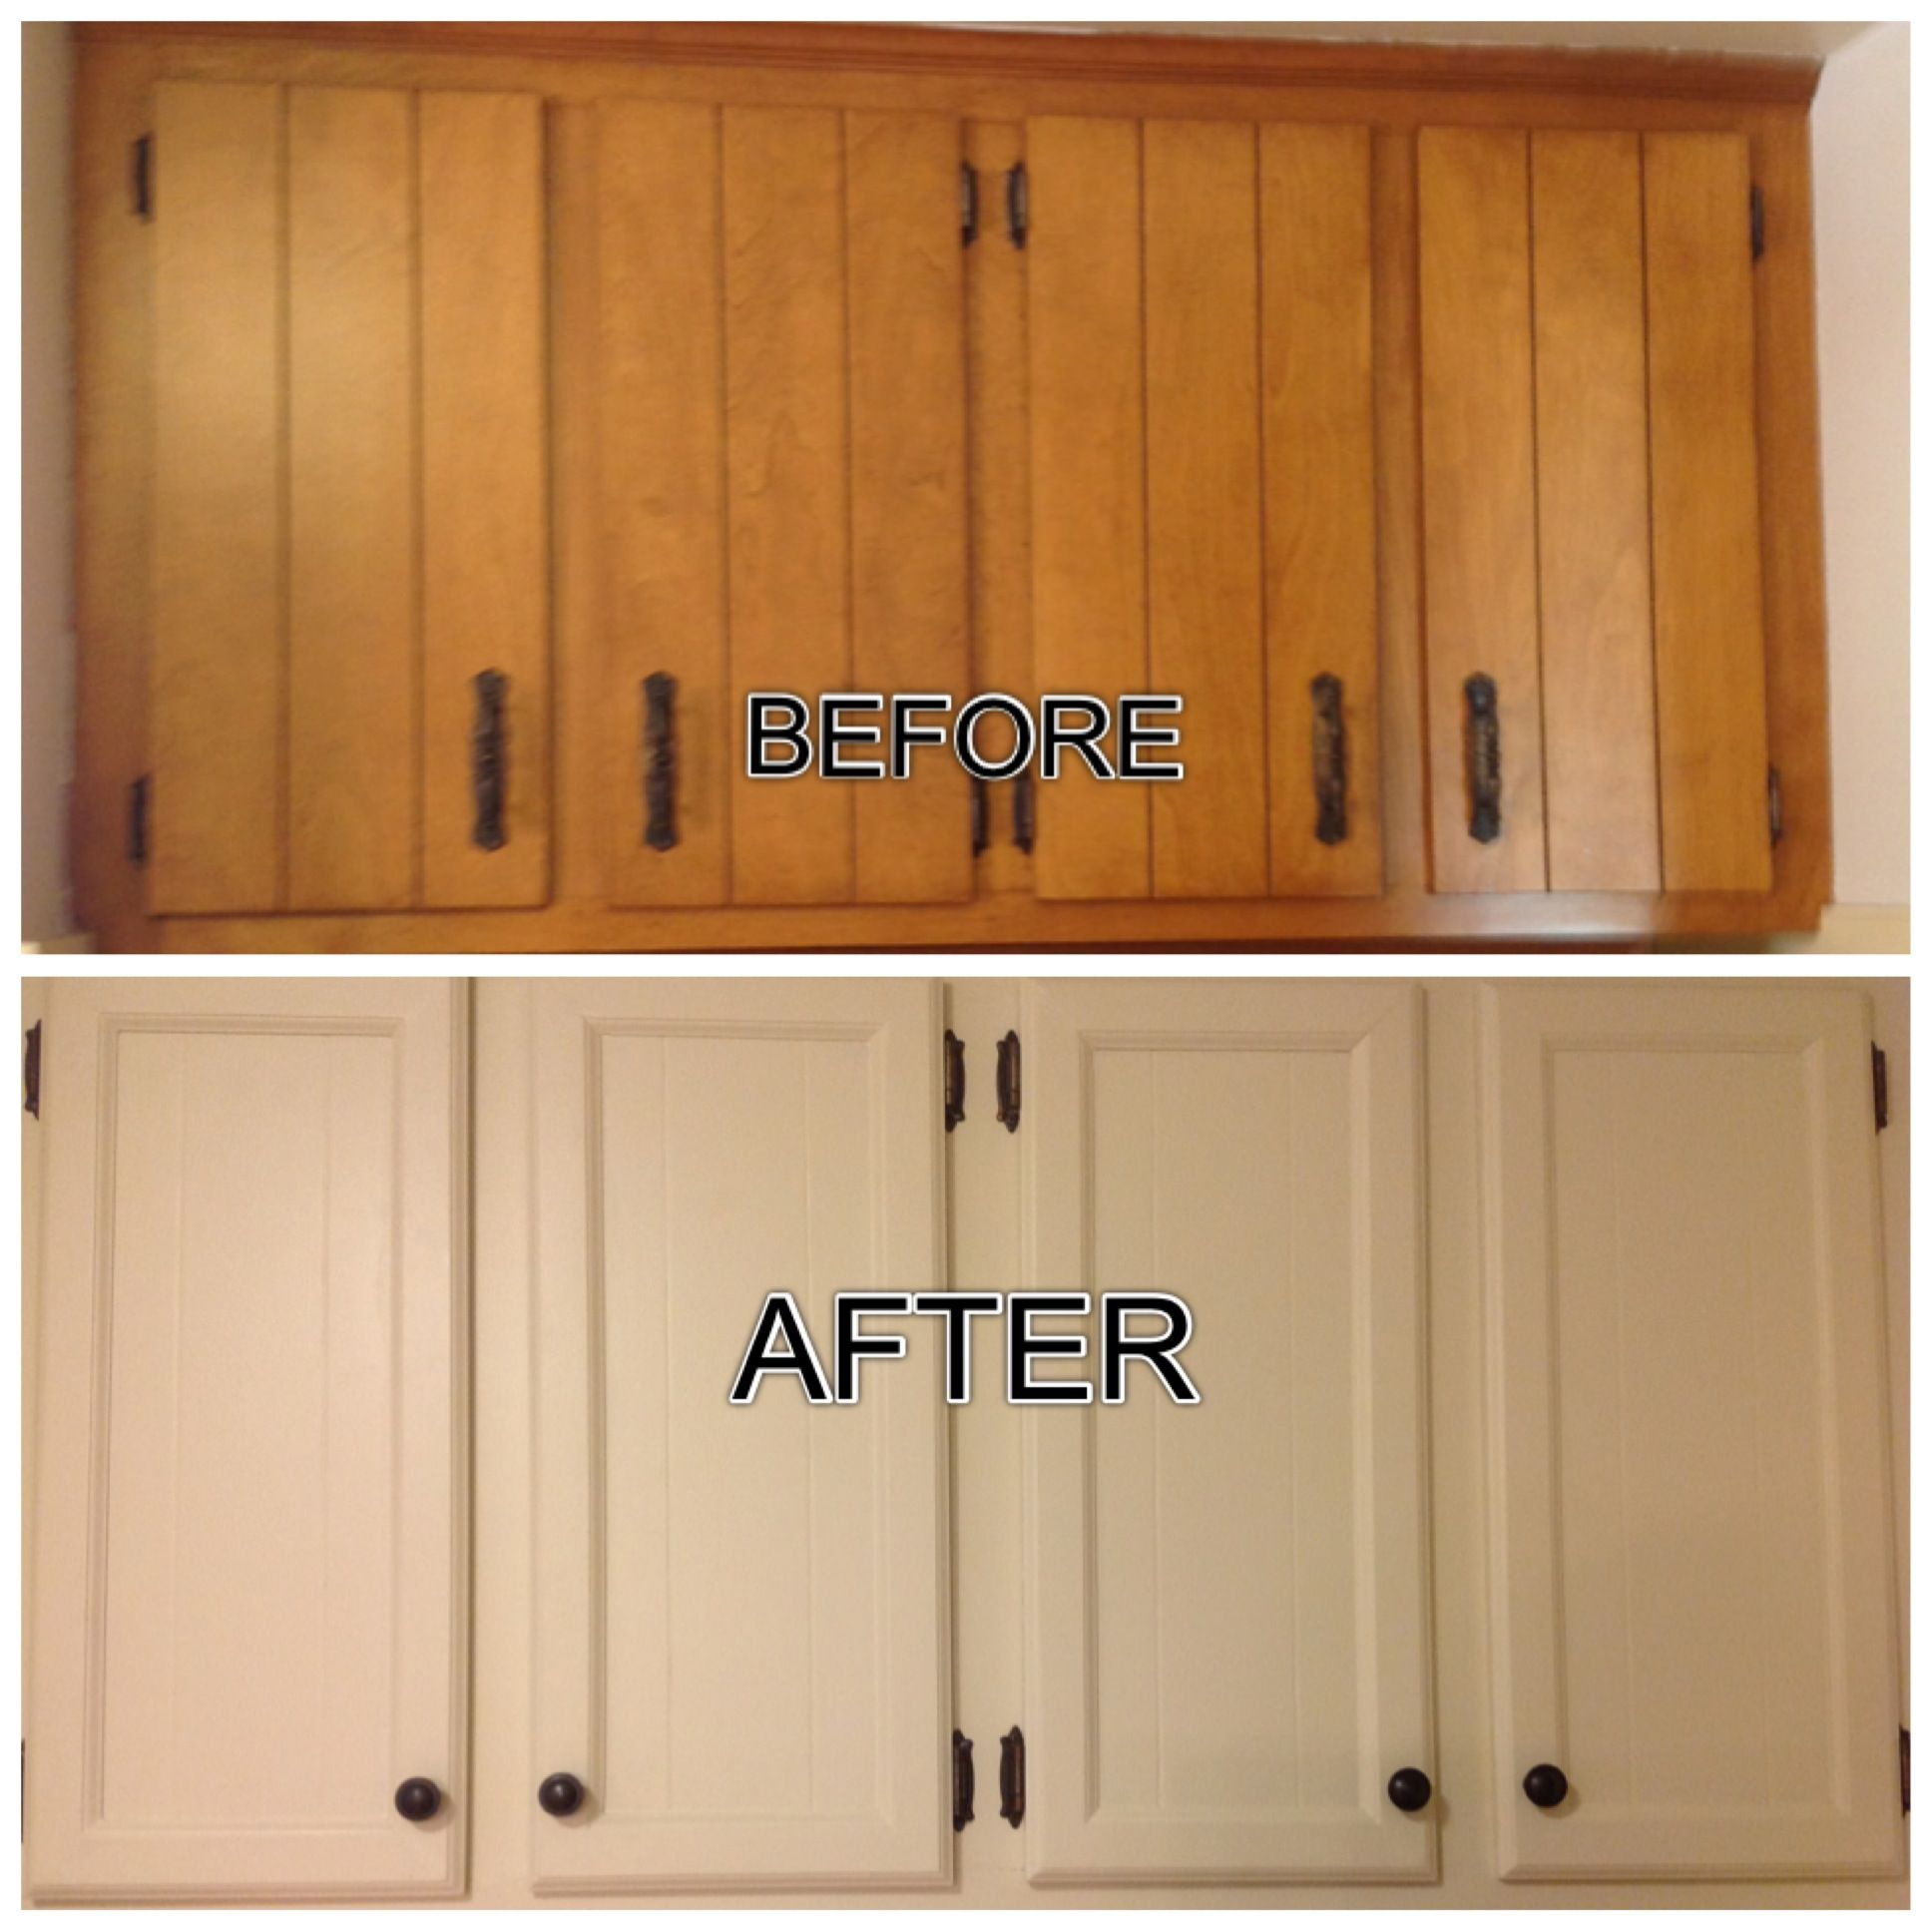 Updated Outdated 1970s Cabinets Filled The Grooves Added Trim within size 1936 X 1936